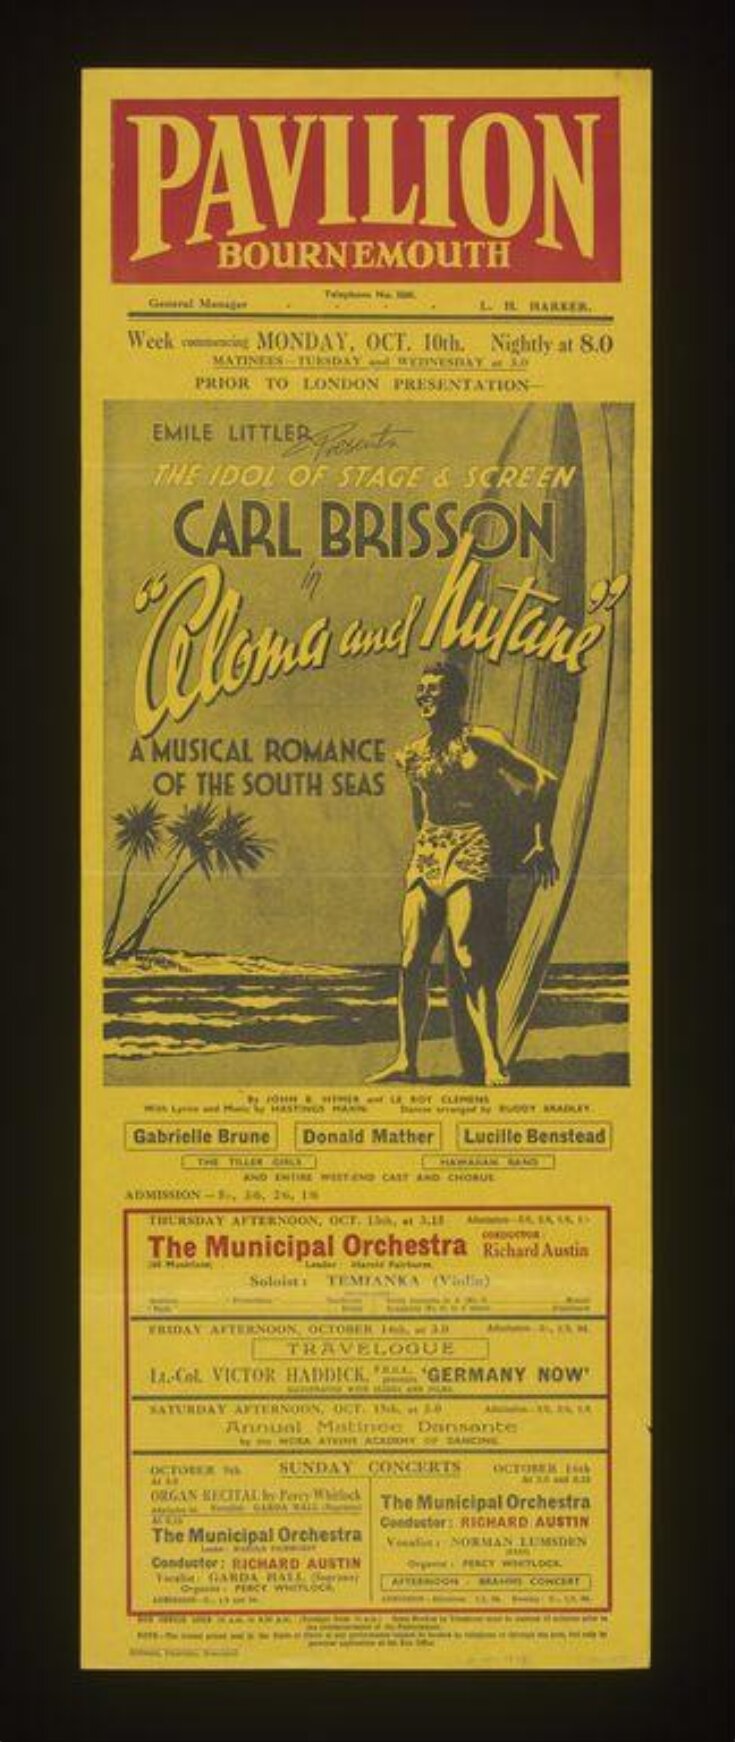 Poster advertising Carl Brisson in<i> Aloma and Nutane</i> image